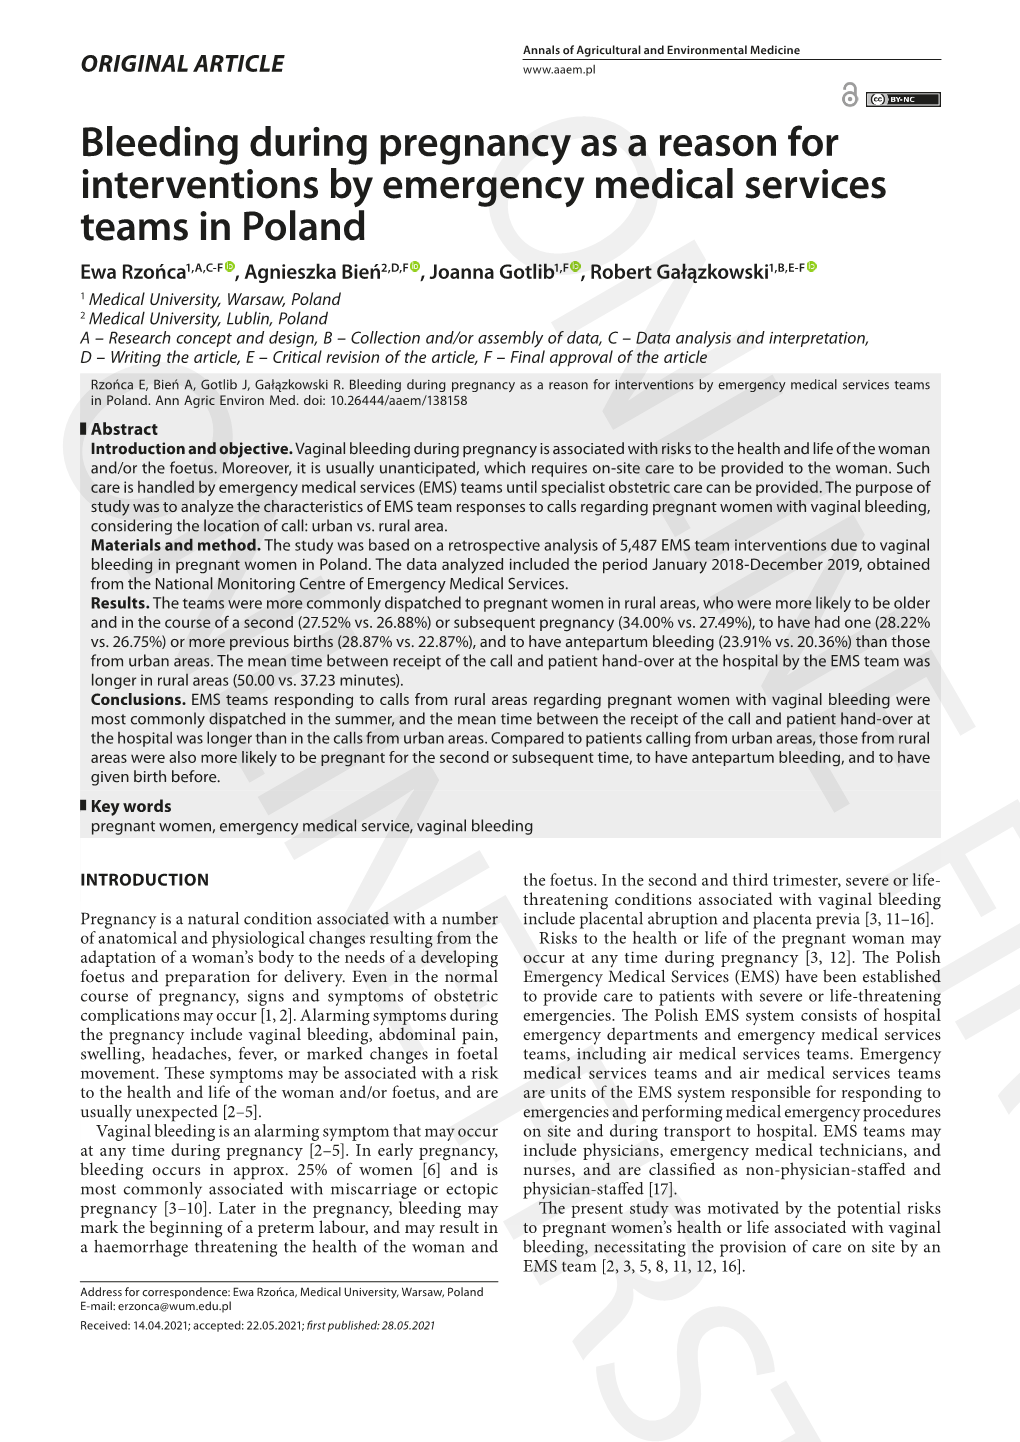 Bleeding During Pregnancy As a Reason for Interventions by Emergency Medical Services Teams in Poland